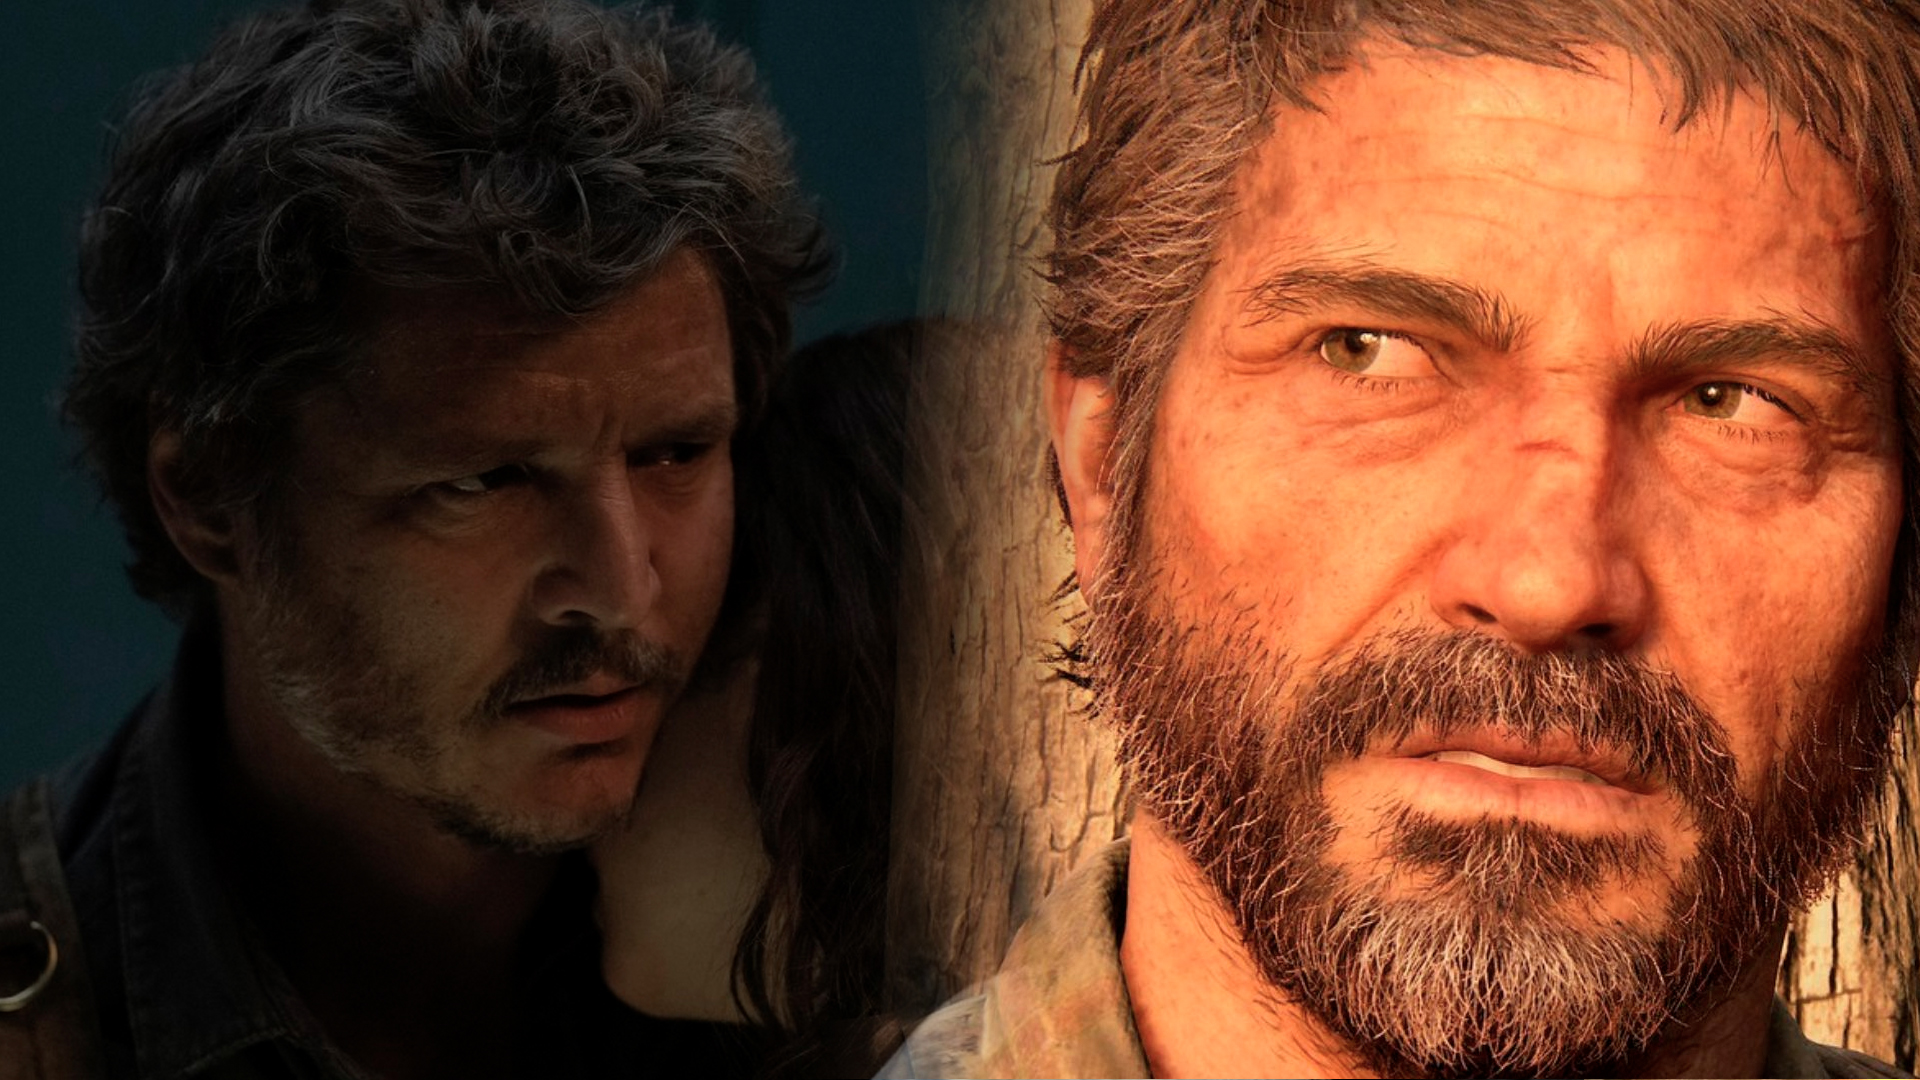 The Last of Us: Original voice actor says he's caught 'off guard' by Pedro  Pascal's version of Joel